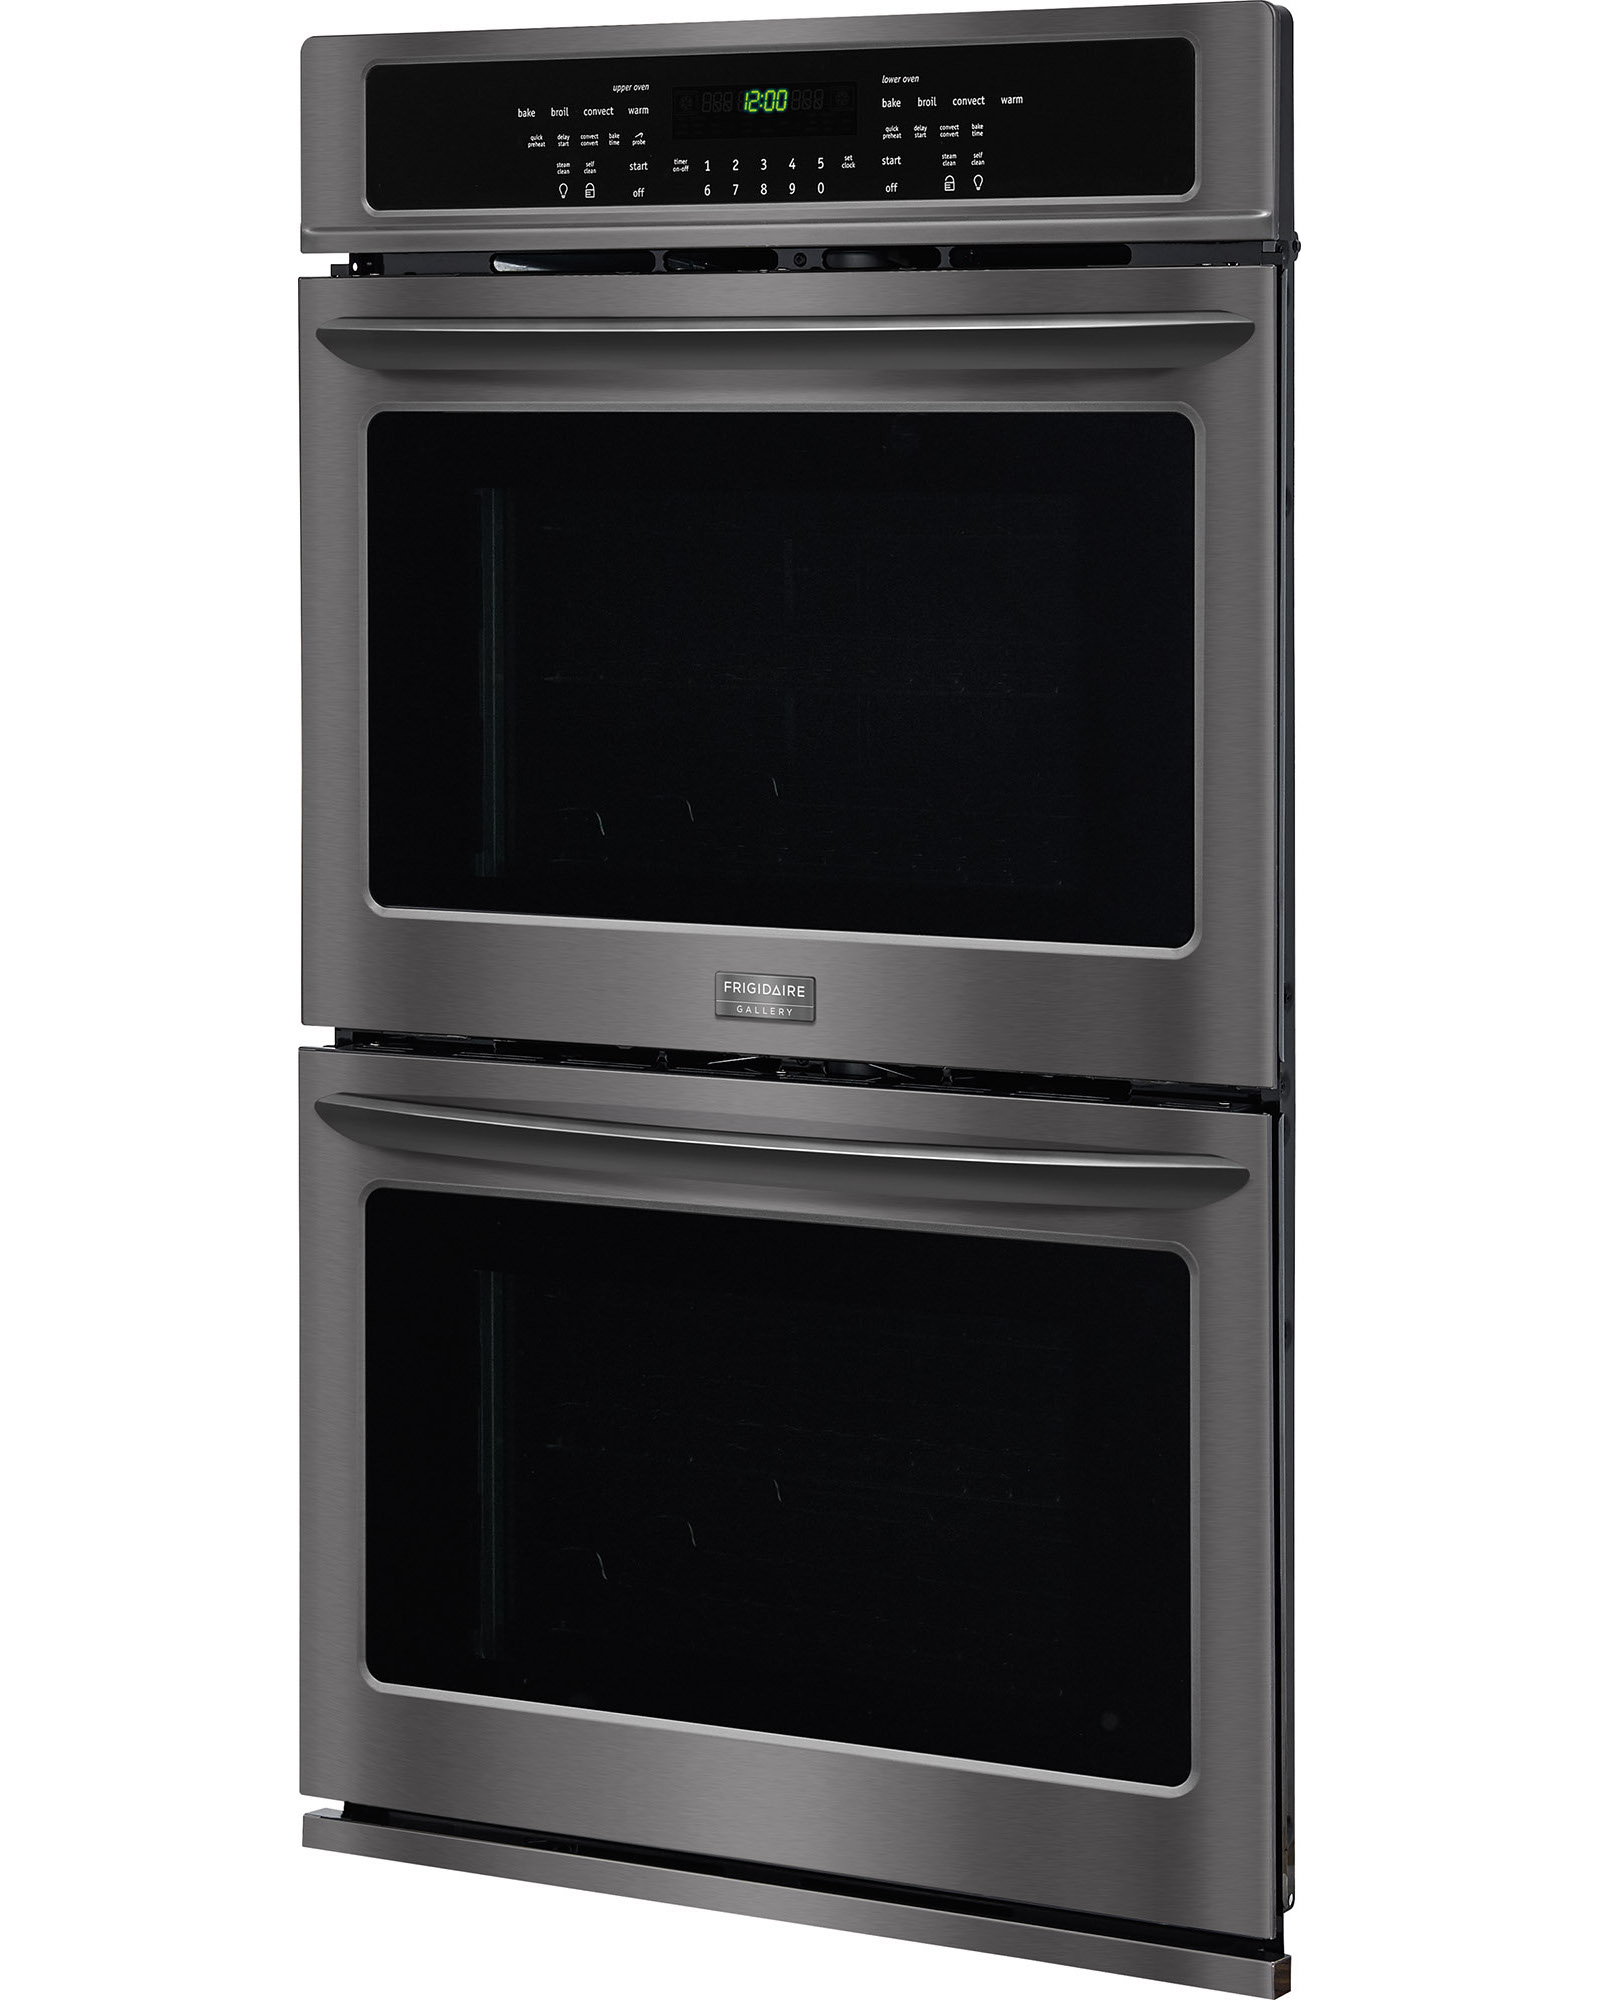 FRIGIDAIRE 30 INCH BLACK/ STAINLESS STEEL WALL OVEN ELECTRIC RANGE Frigidaire Oven Black Stainless Steel